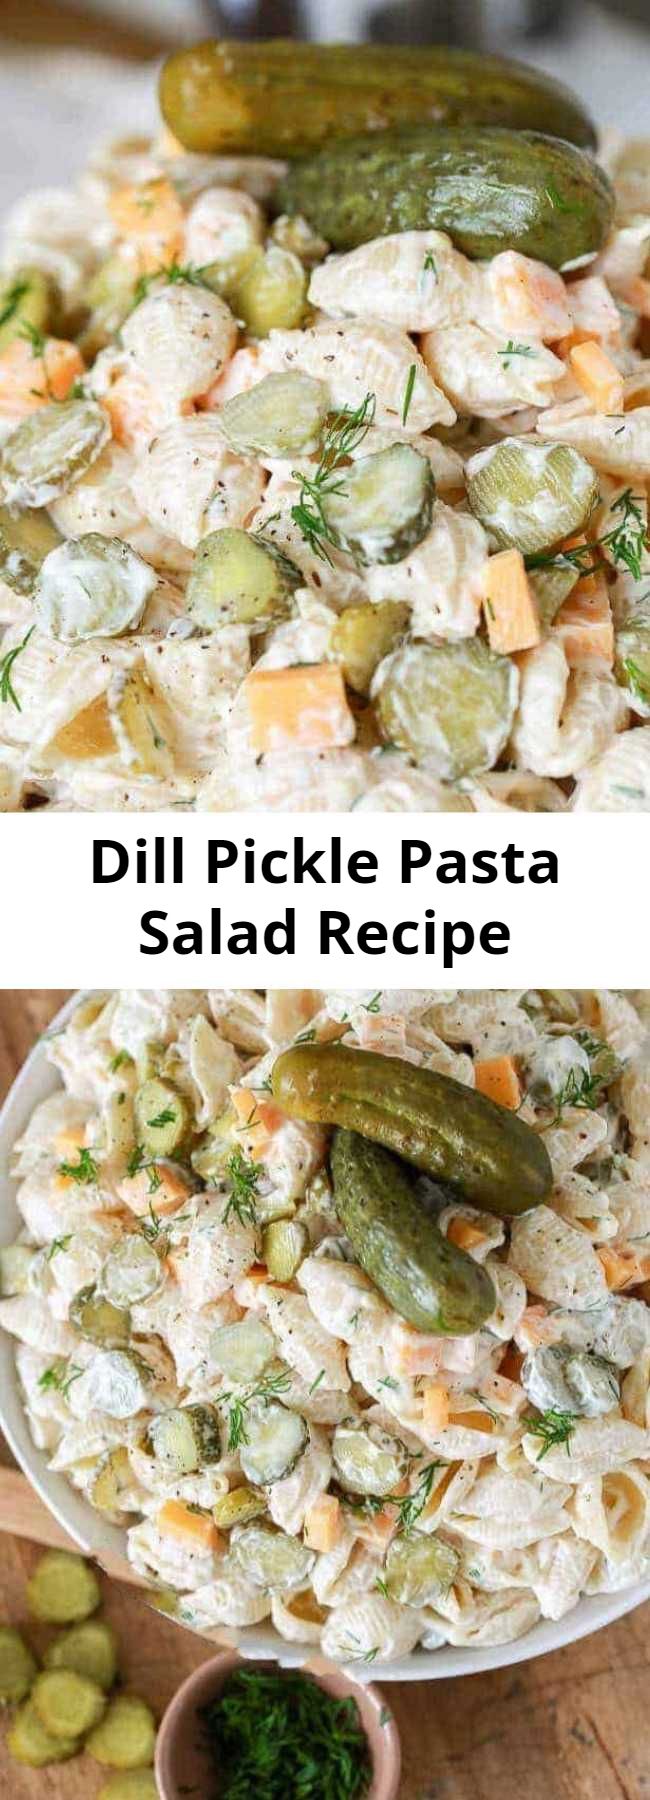 Dill Pickle Pasta Salad Recipe - This is literally my favorite pasta salad ever! In this creamy pasta salad recipe, dill pickles play a starring role and add tons of flavor and crunch! This recipe is even better when it’s made ahead of time making it the perfect potluck dish!